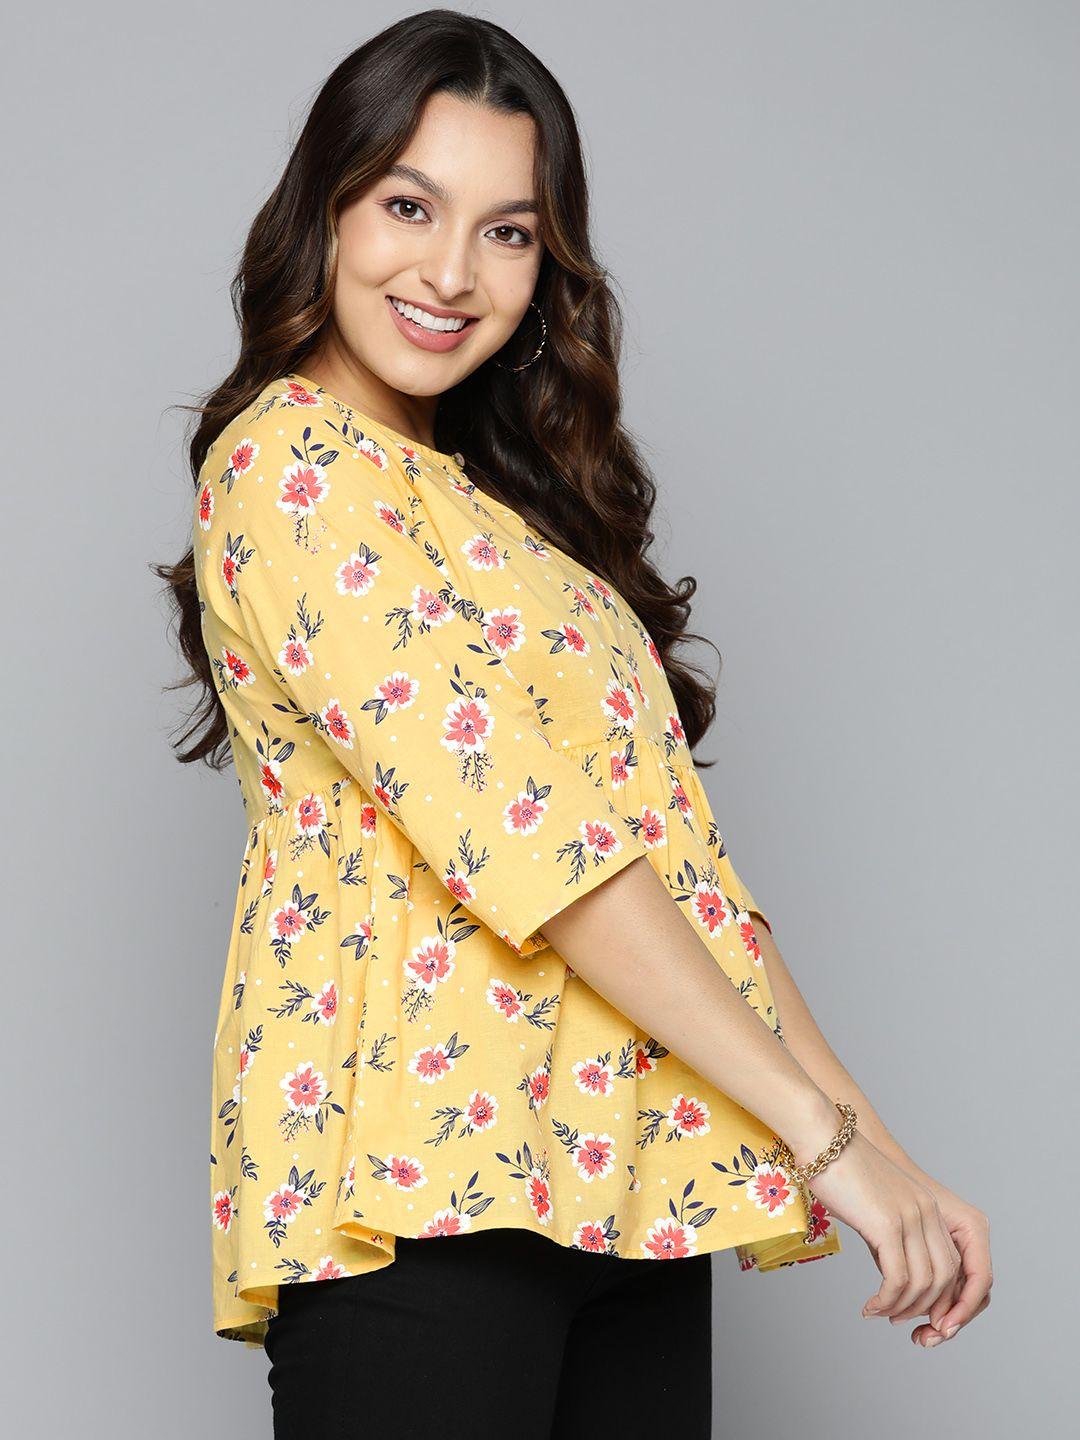 here&now-yellow-floral-print-keyhole-neck-peplum-top